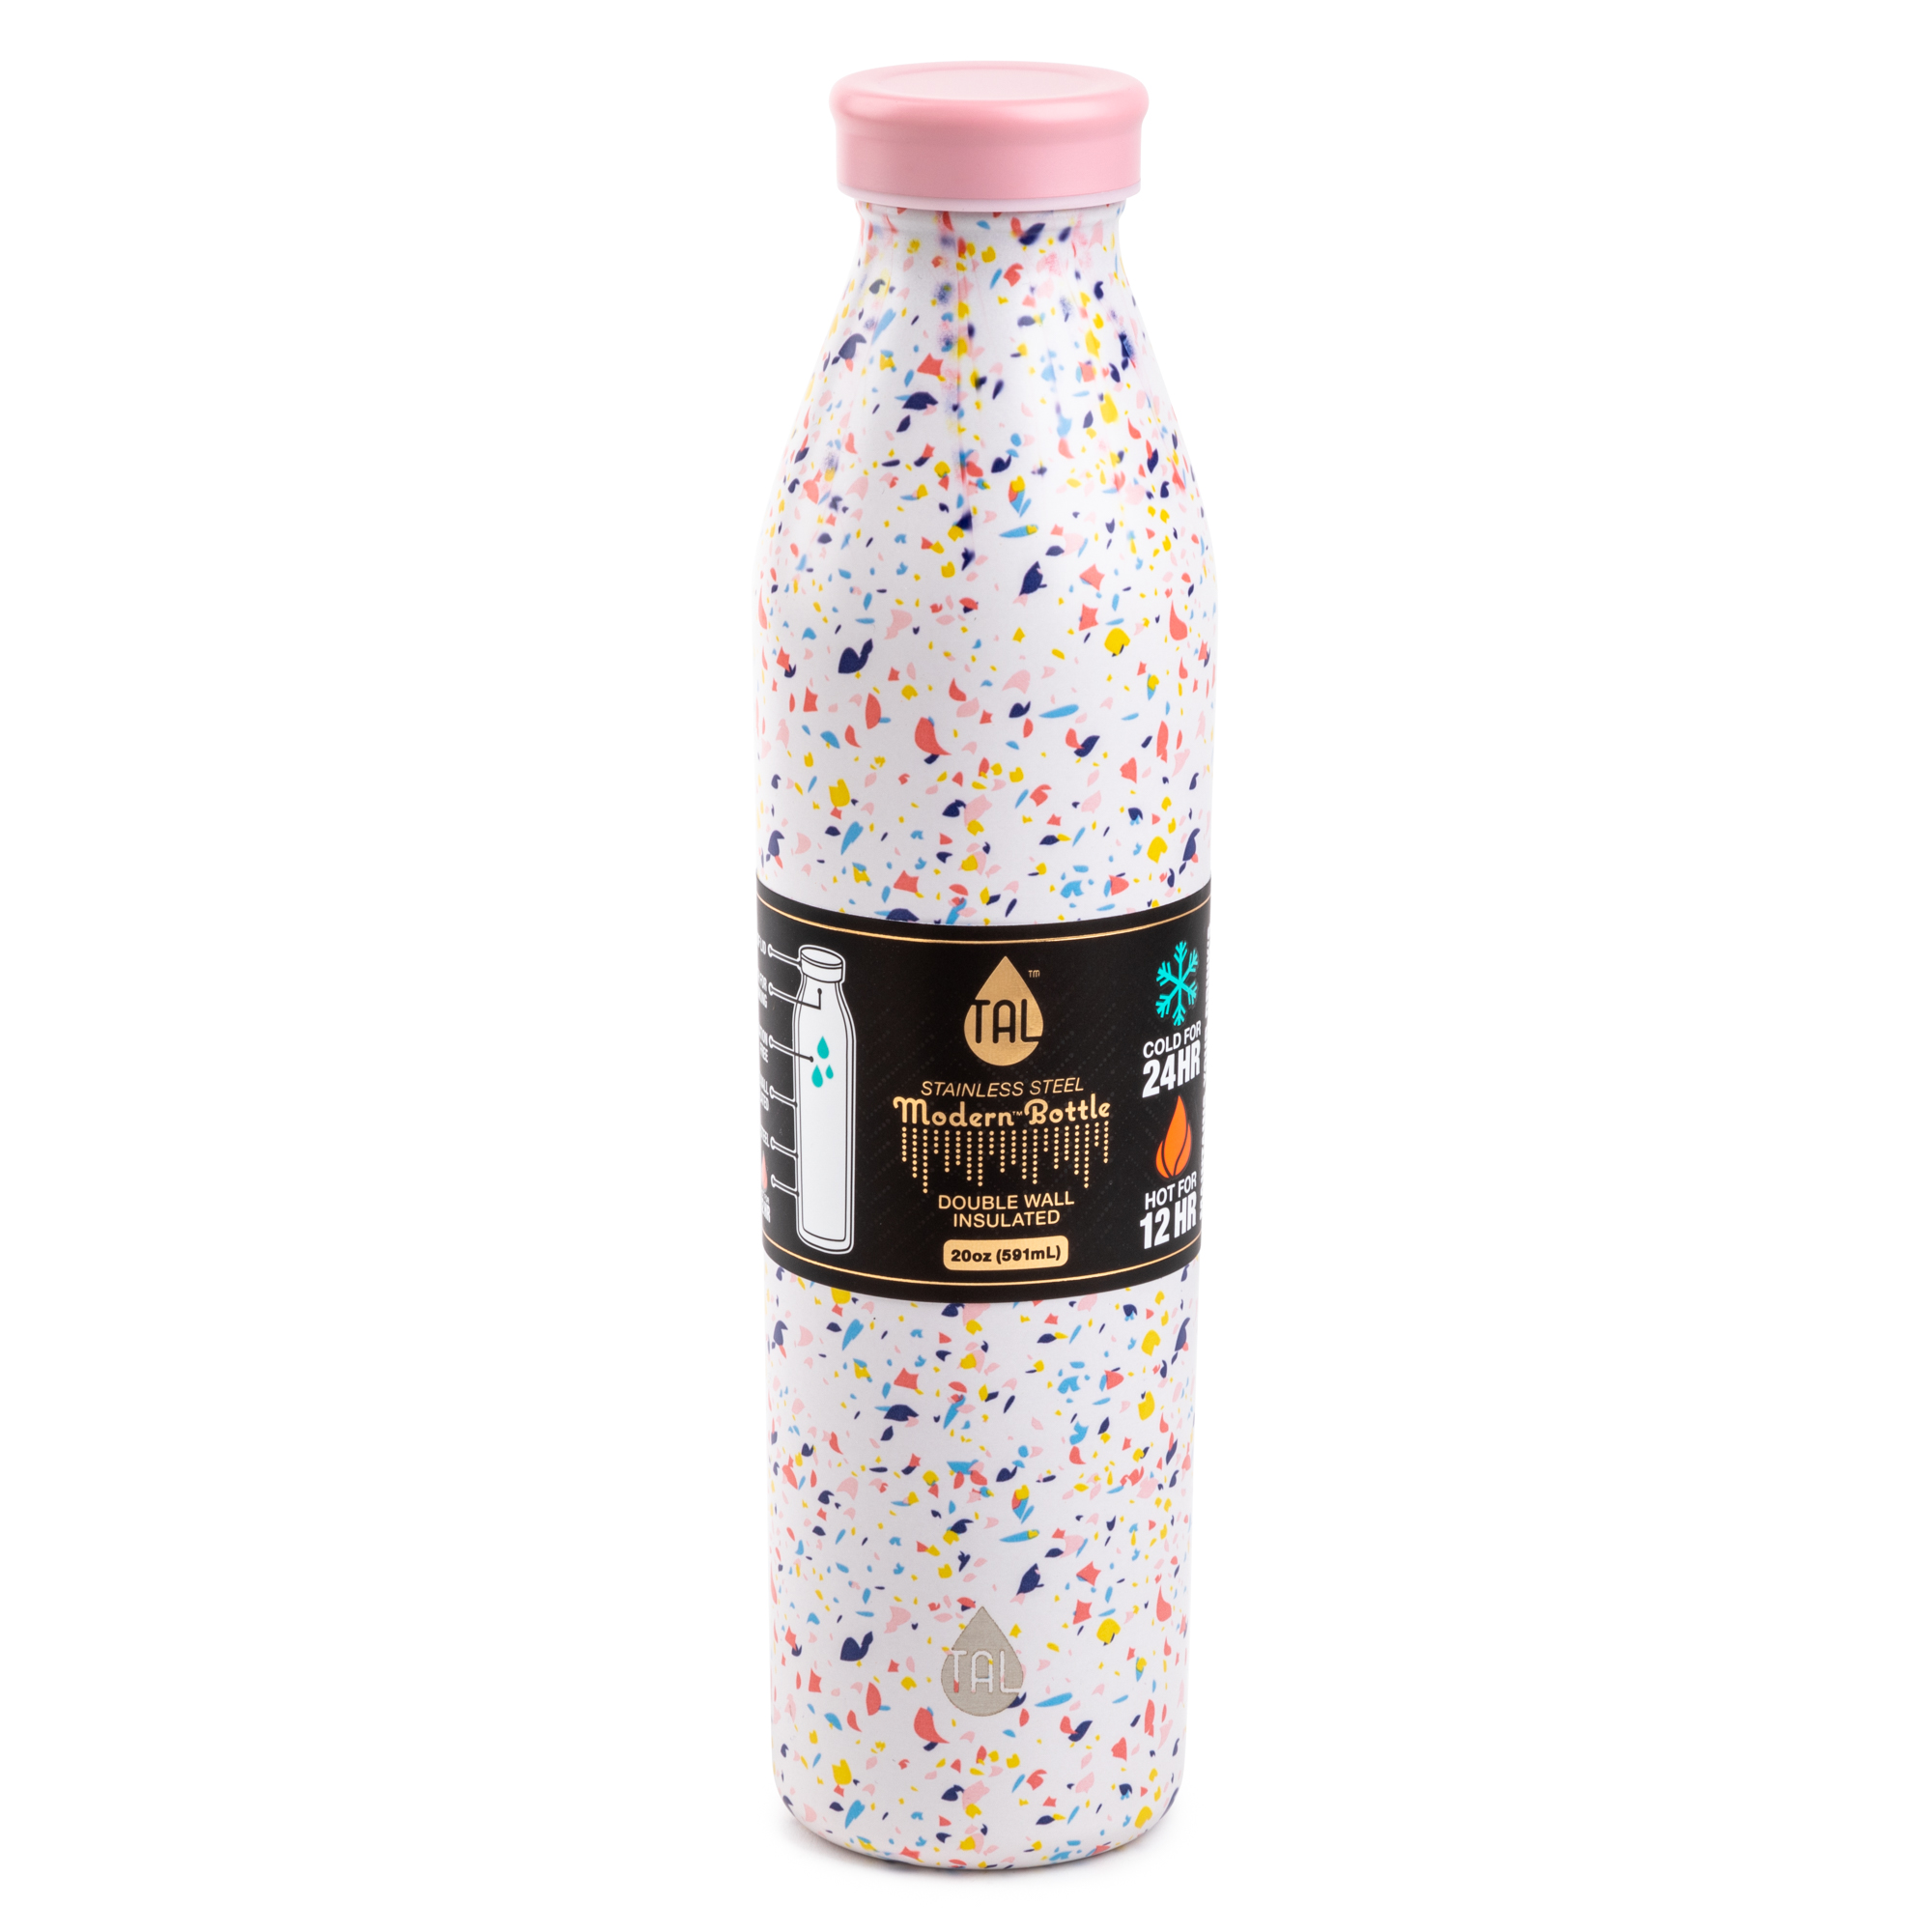 TAL Stainless Steel Water Bottle, 20 fluid ounces, Confetti - image 5 of 5